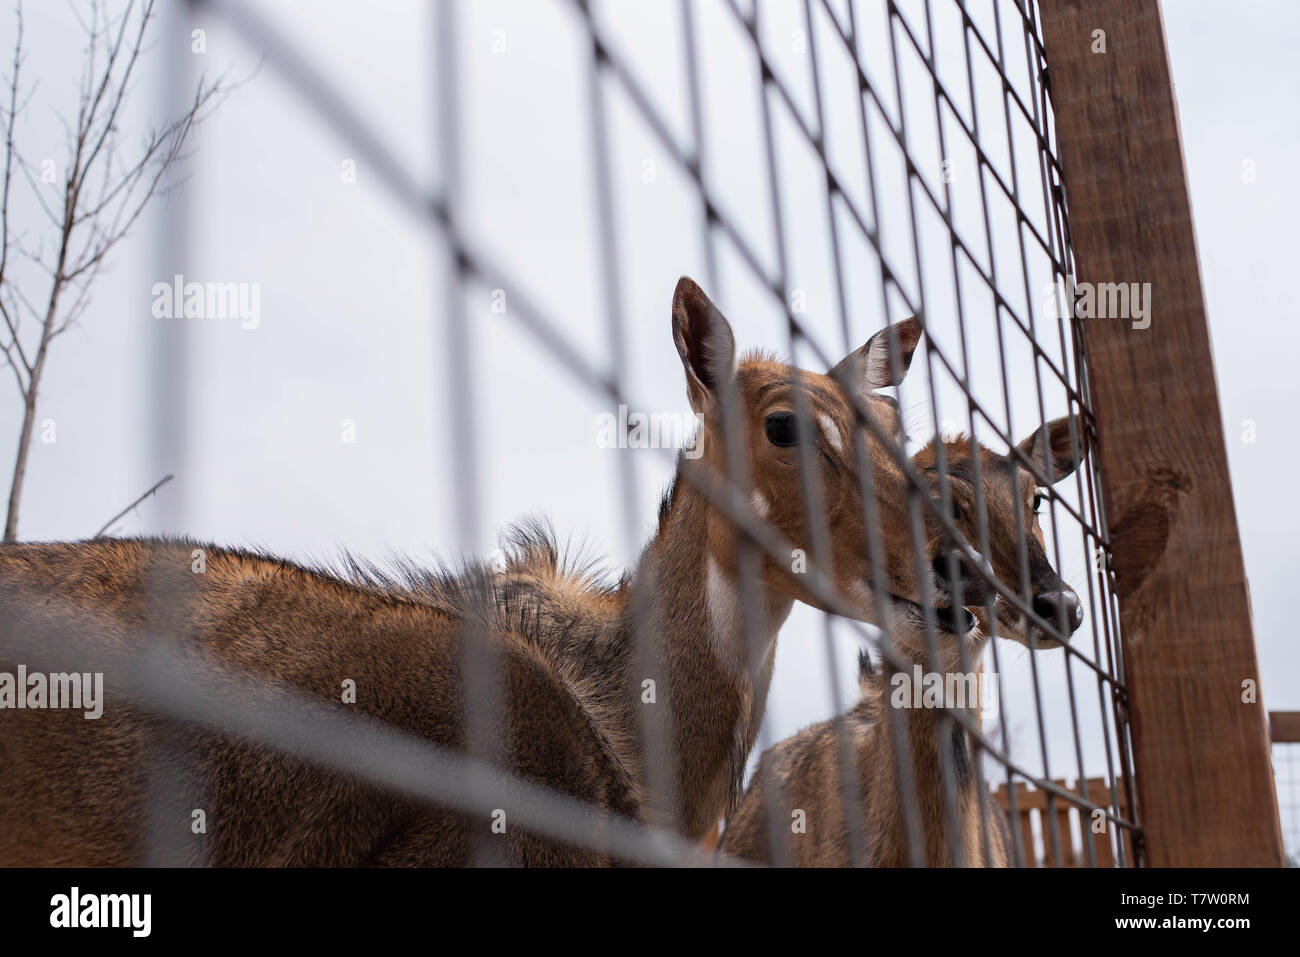 African deer on display at a zoo in Harpursville, NY. United States Stock Photo